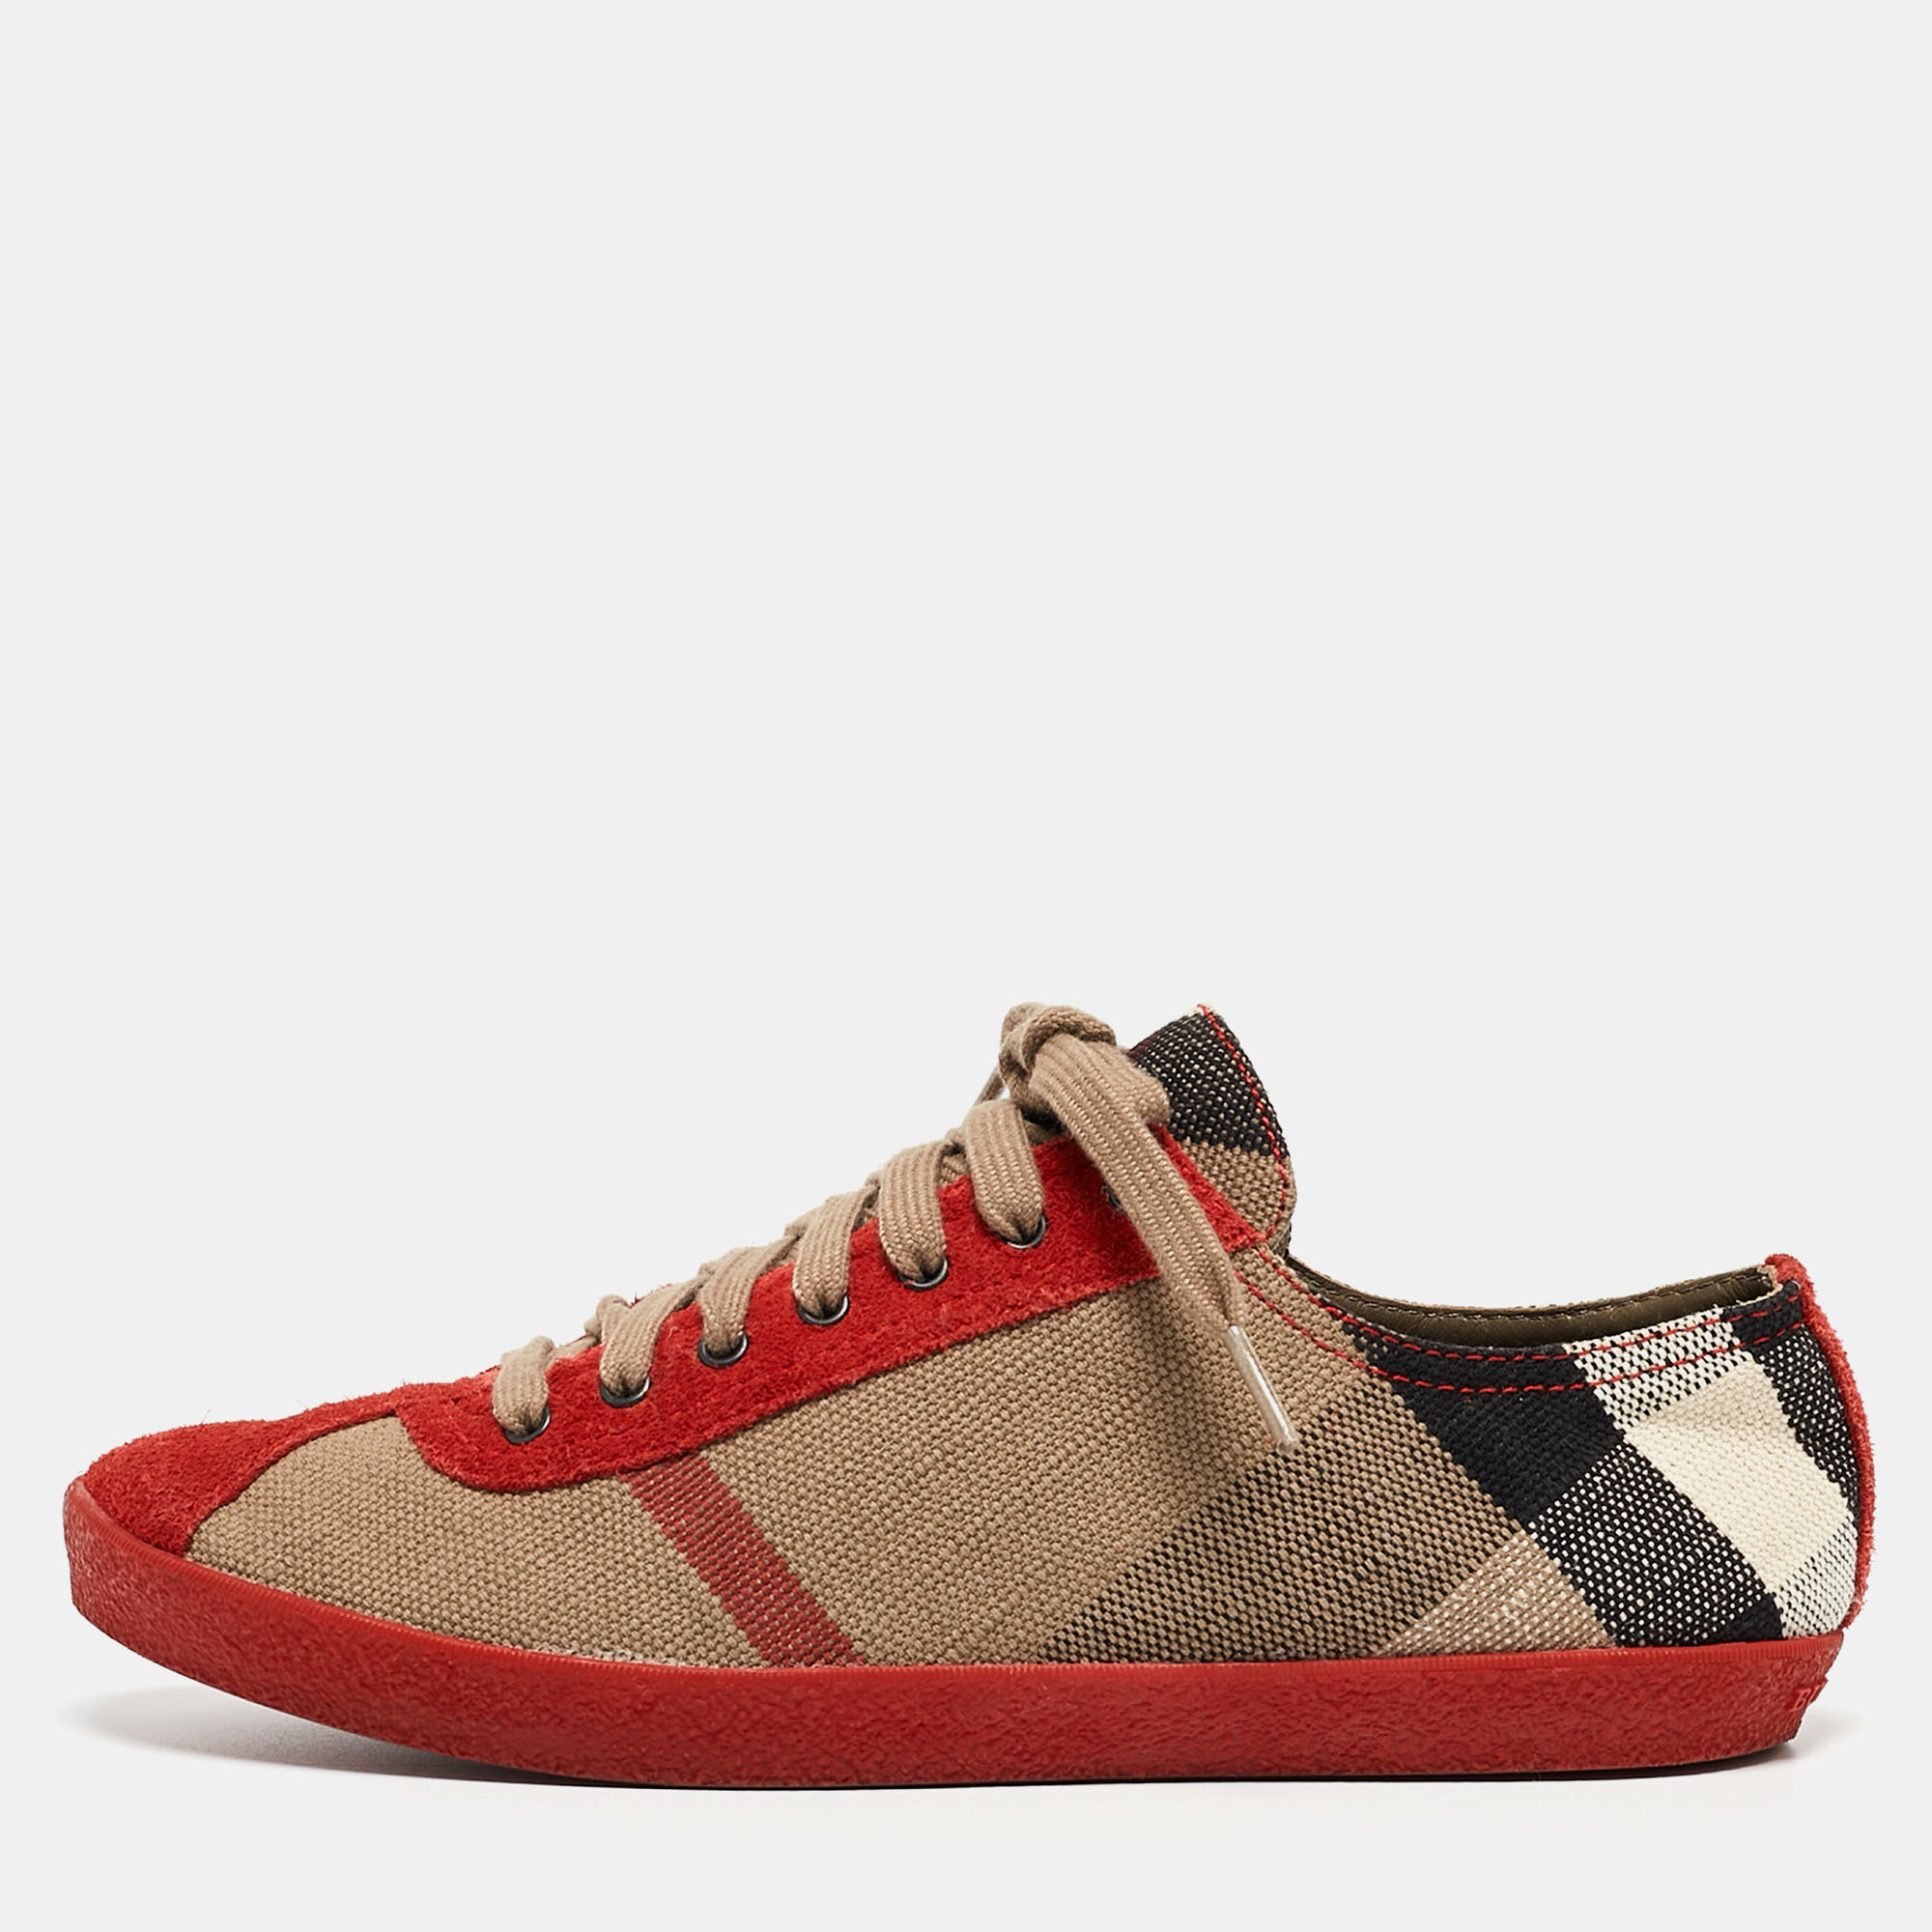 Burberry Red/Brown Suede And Nova Check Canvas Low Top Sneakers Size 37